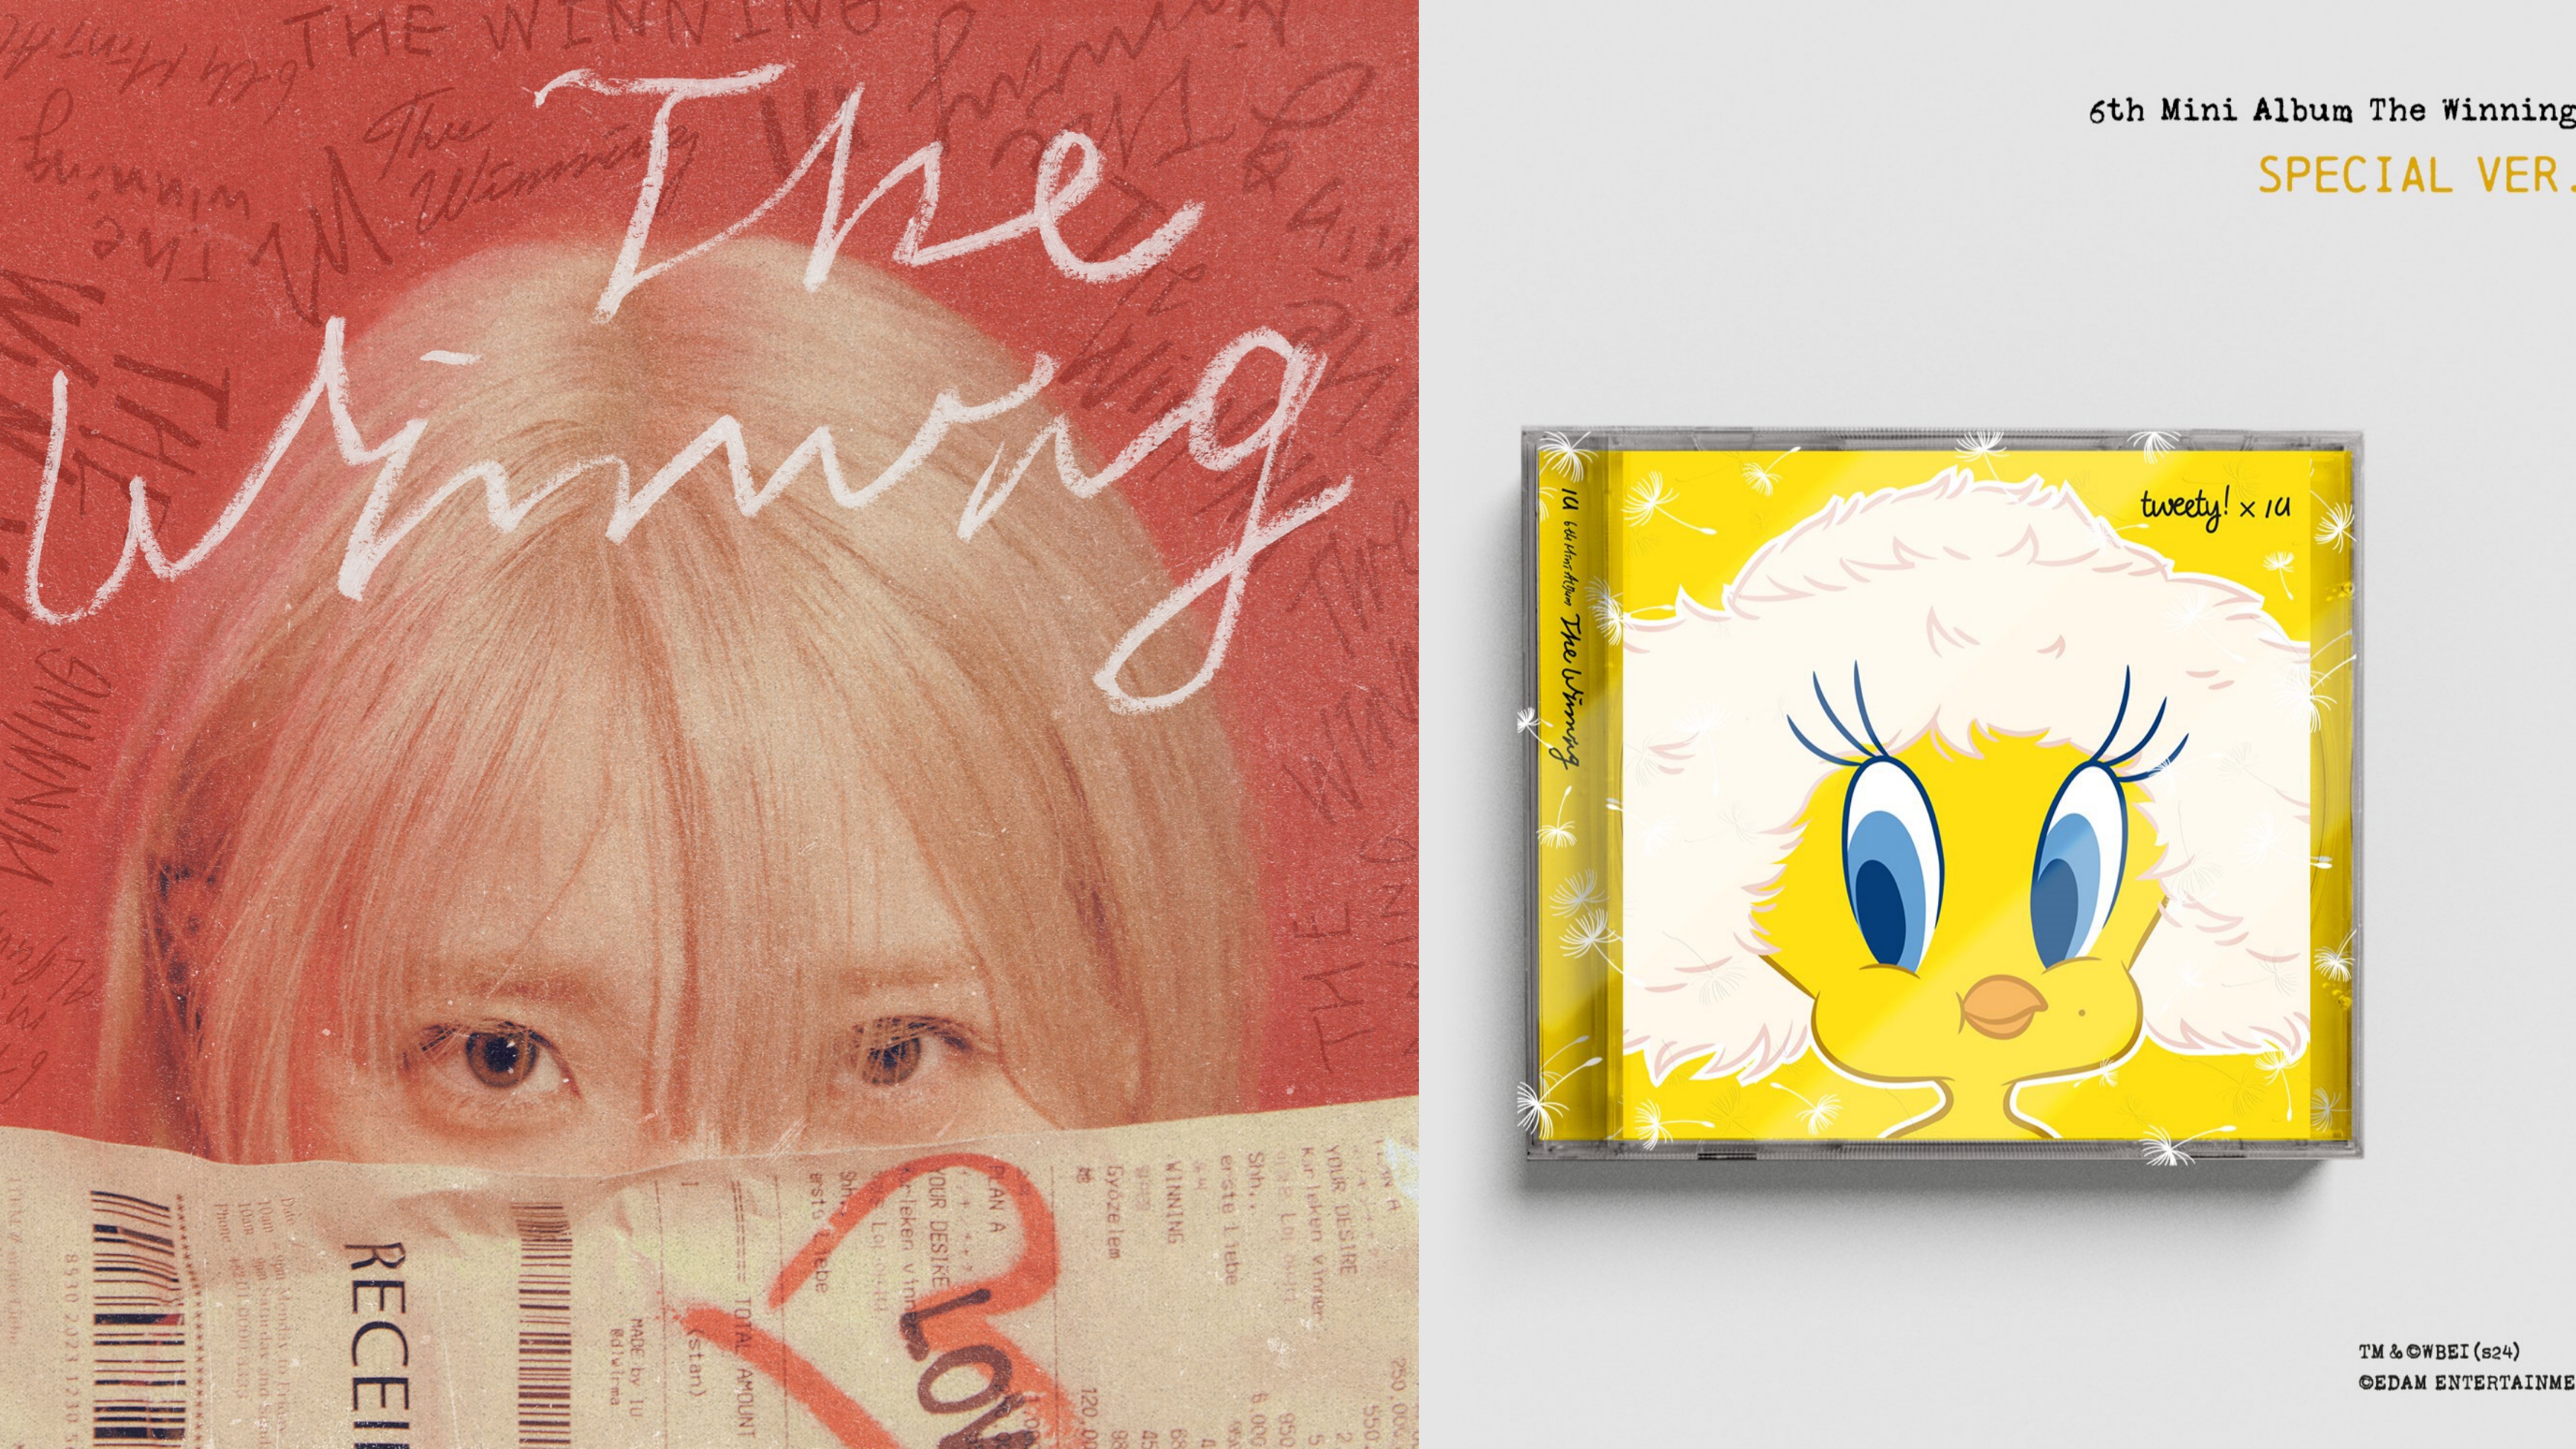 IU Successfully Collaborates with 4 Famous Artists and Her Favorite Tweety Bird Character in Her Latest Album 'The Winning'